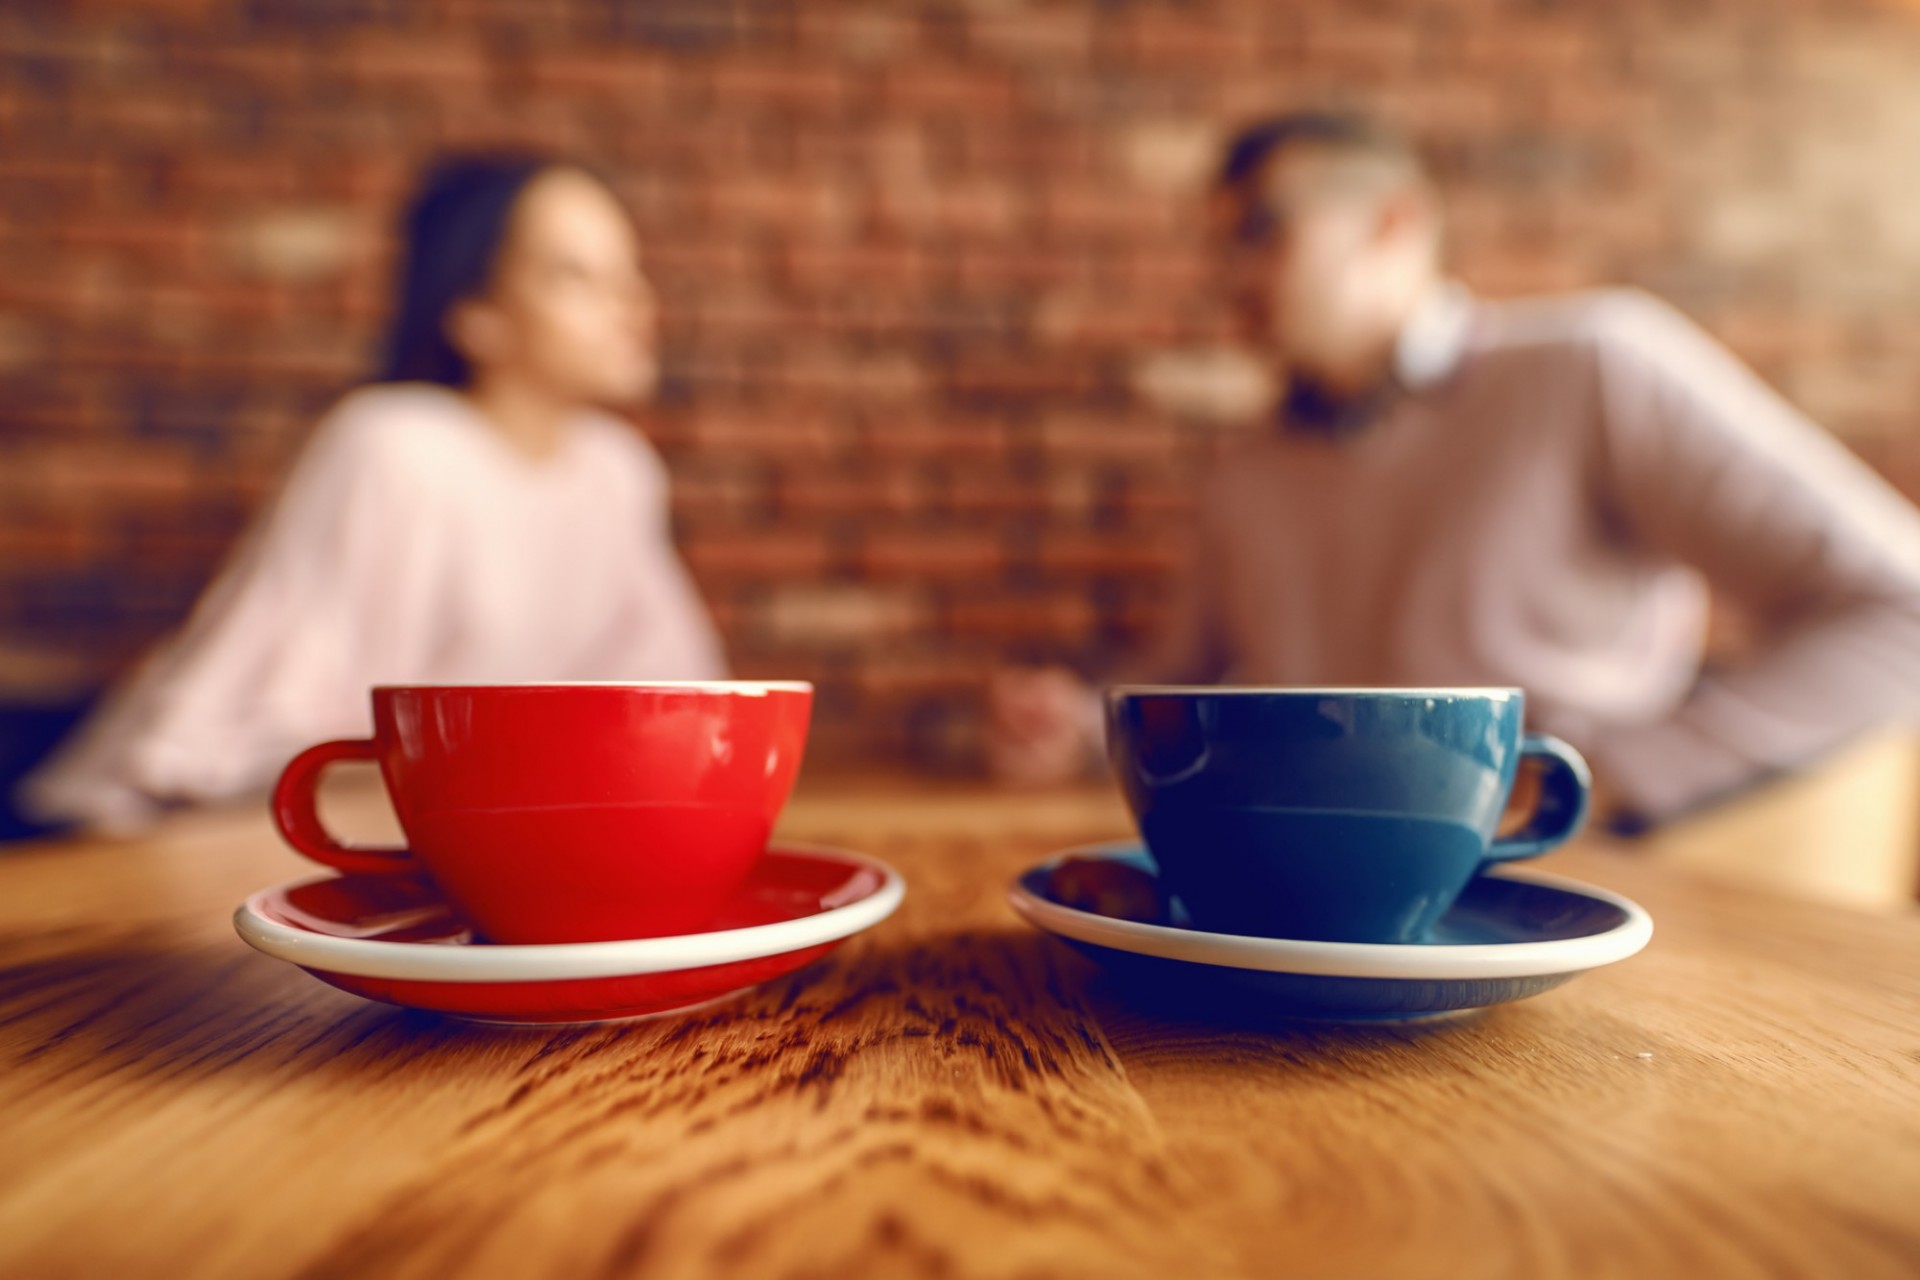 Two cups of coffee in foreground, two people having a conversation in the background.